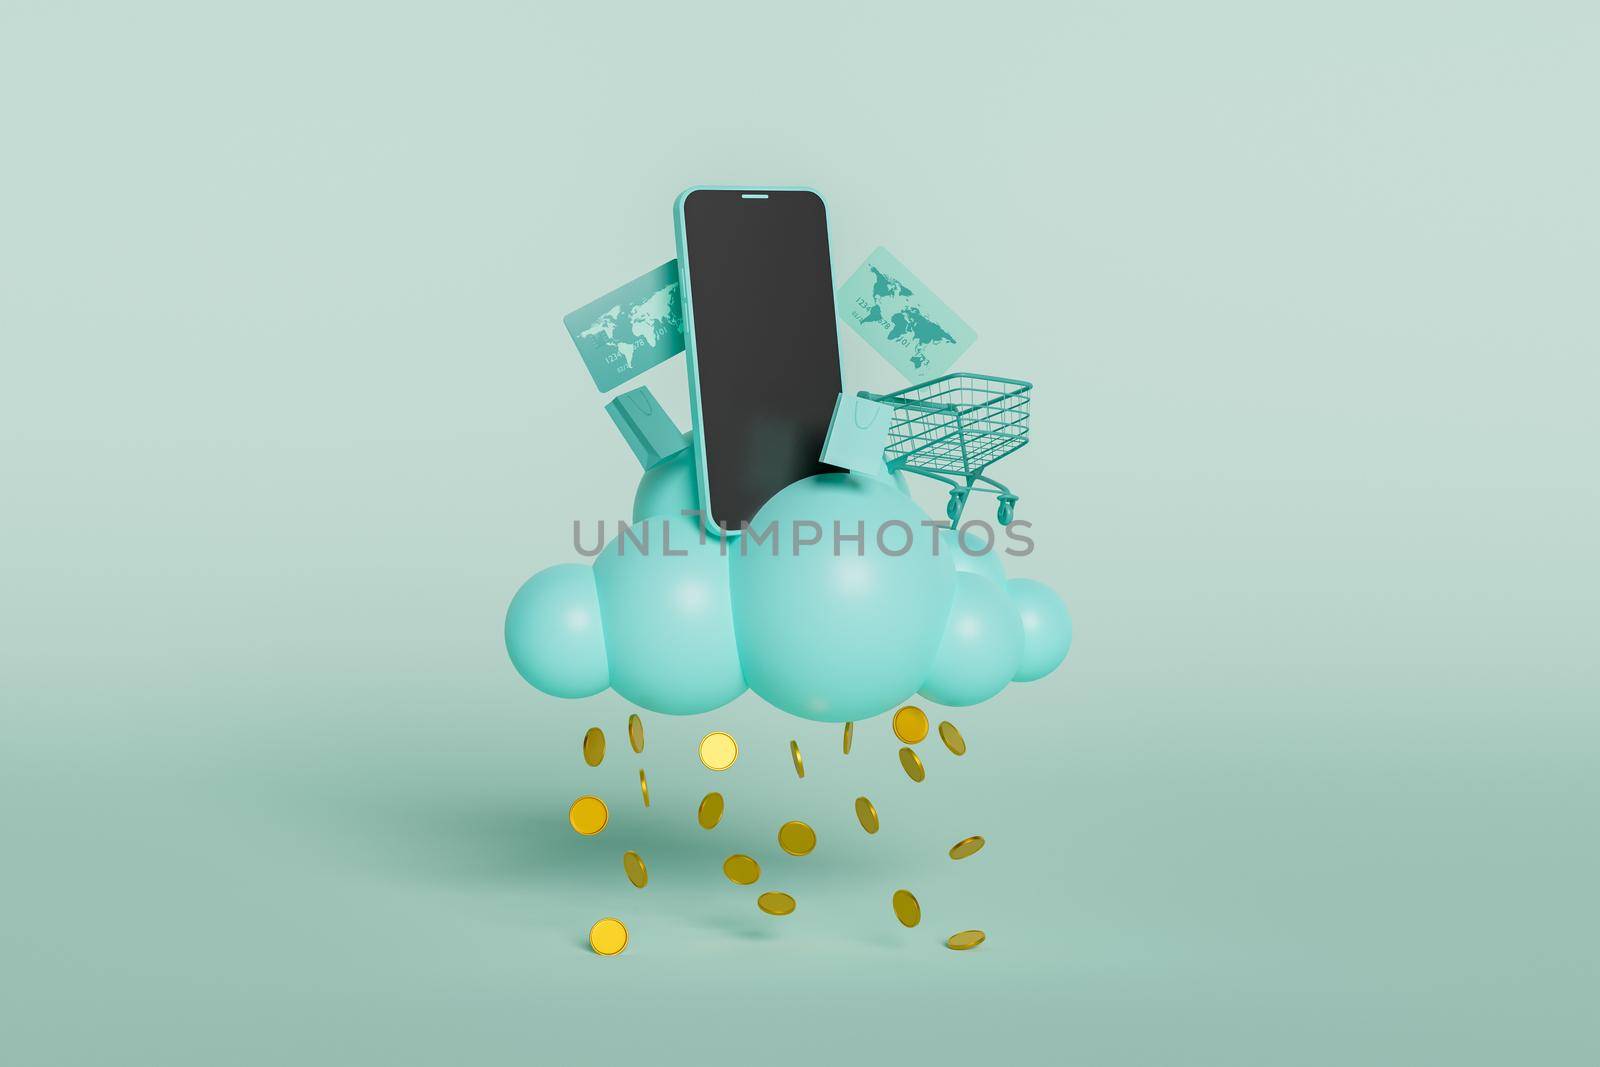 mobile phone on a cloud of spheres dropping coins with credit cards and shopping carts around. concept of online shopping, offers, sales and liquidation. 3d rendering